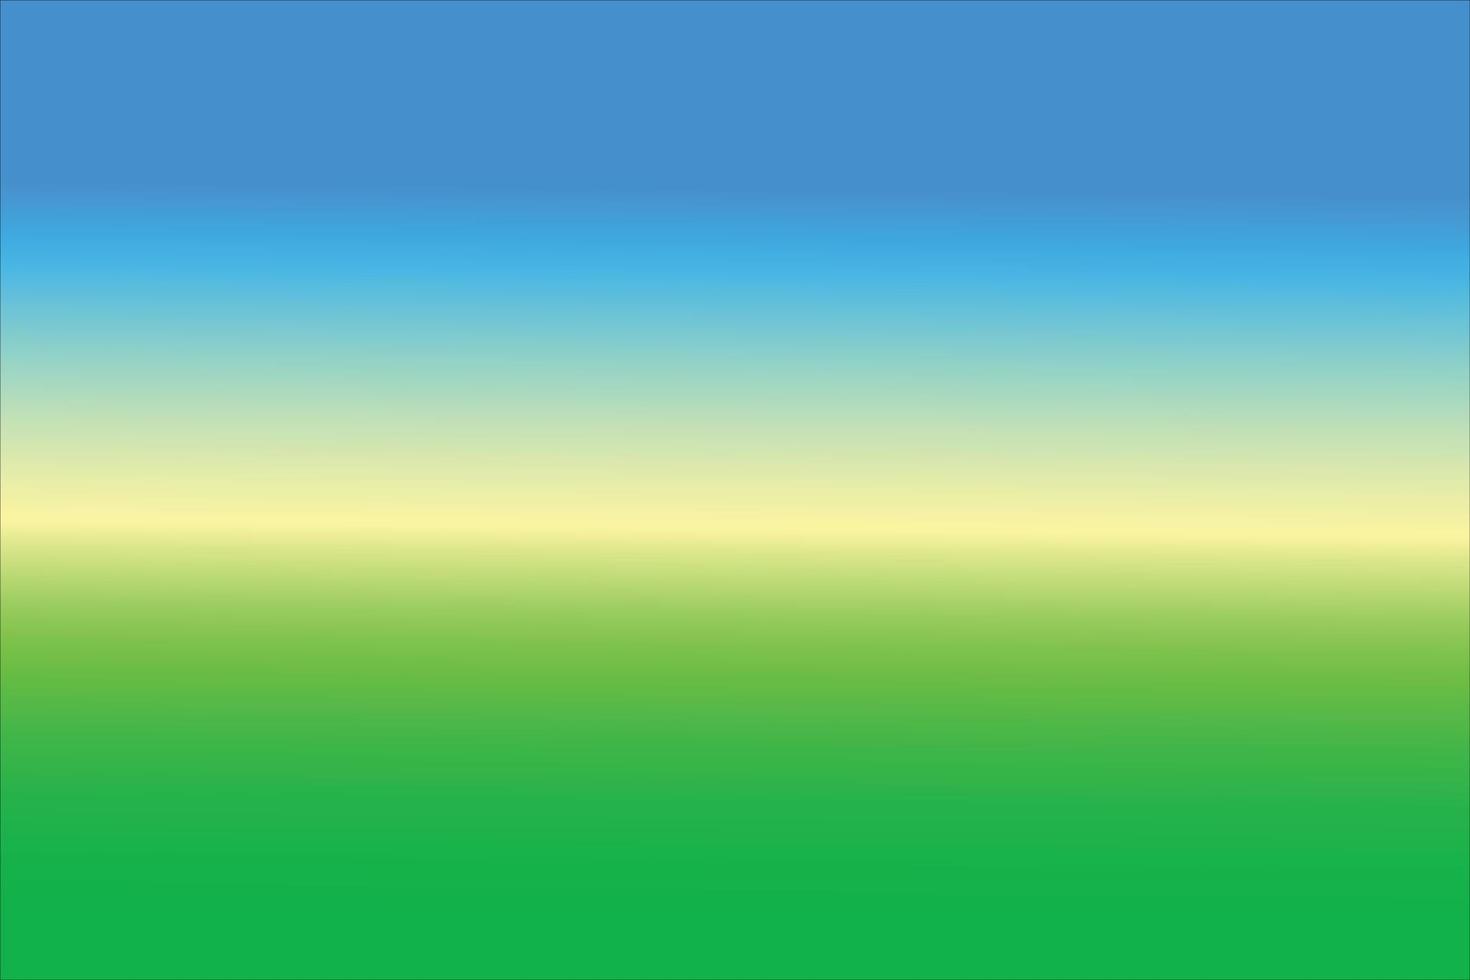 Abstract gradation of blue yellow and green color background vector